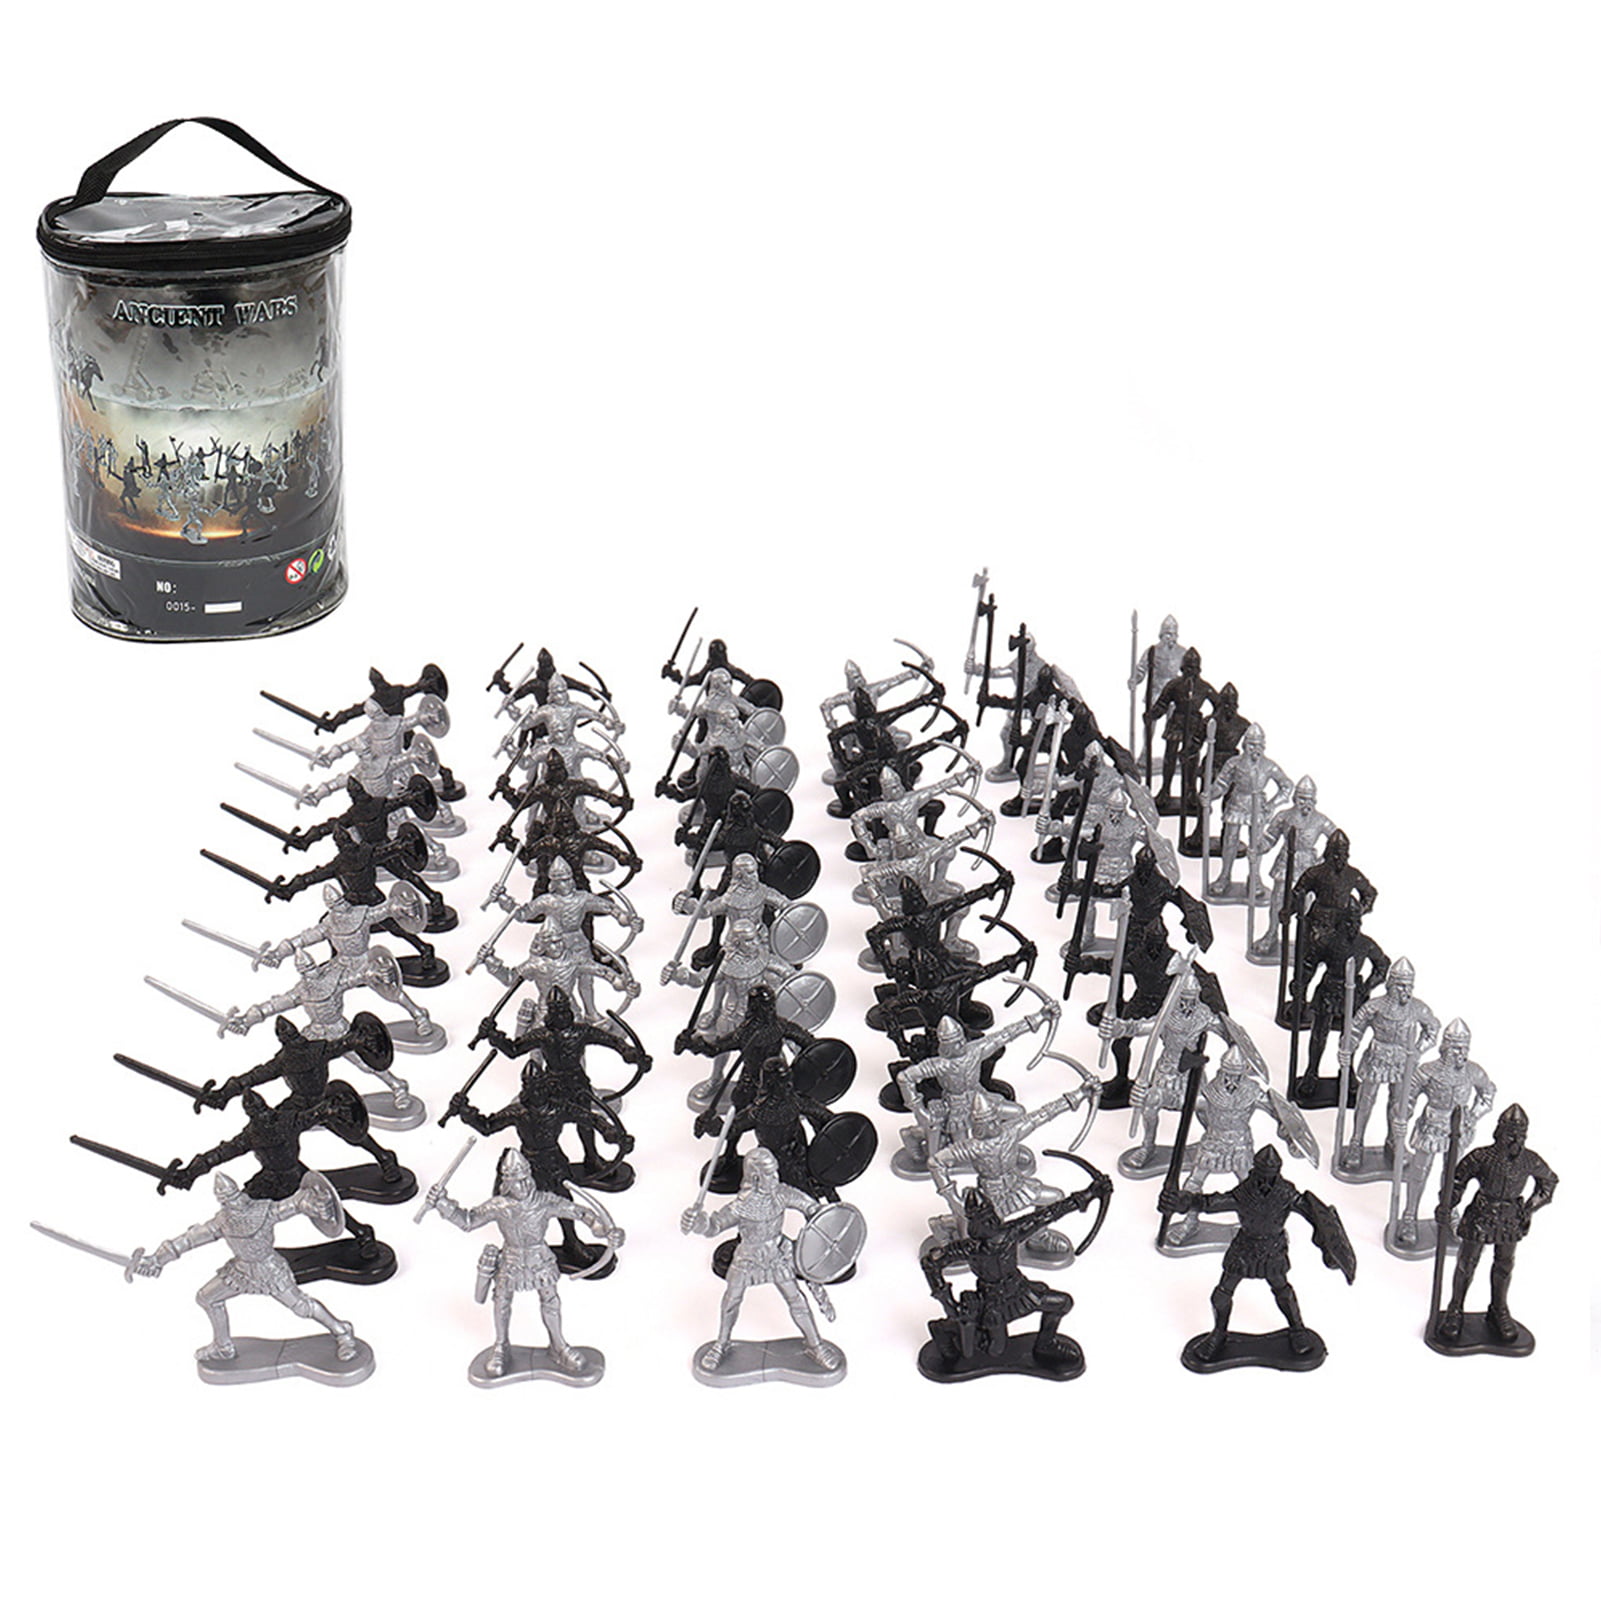 Medieval Knights Catapult Castle Toy Army Soldiers Infantry Figure Set DIY Gift 